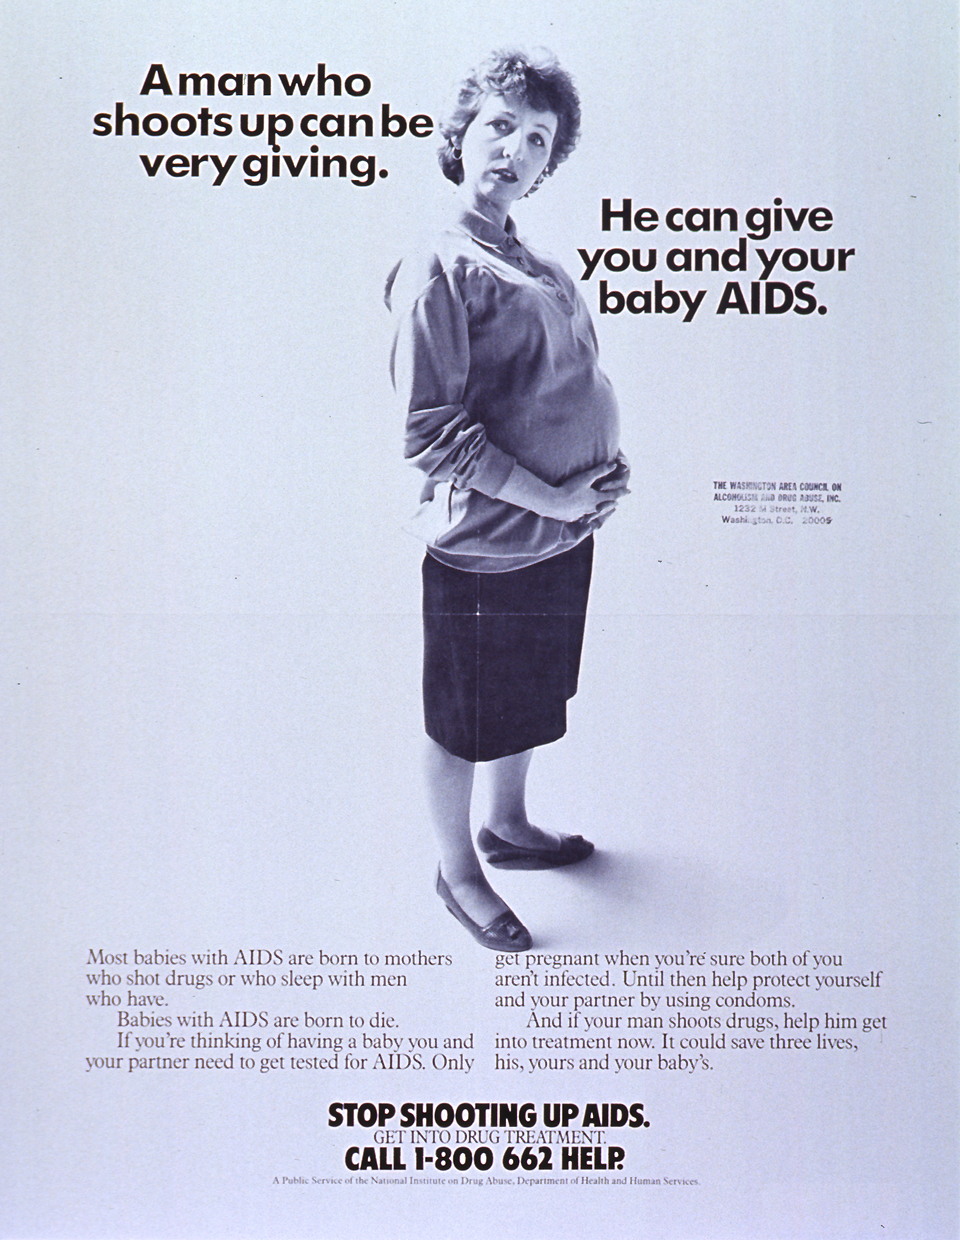 White poster with black lettering. Title A Man Who Shoots Up Can Be Very Giving is near the top of poster. Visual image is a reproduction of a black and white photo of a pregnant woman of European heritage. She is standing in profile, with her head turned to face the viewer. Lengthy caption appears below photo, stresses the risk of transmitting AIDS to a baby and the importance of testing and drug treatment. Remaining text, including a phone number for treatment information, at bottom of poster. Poster also bears an address stamp from the Washington Area Council on Alcoholism and Drug Abuse.